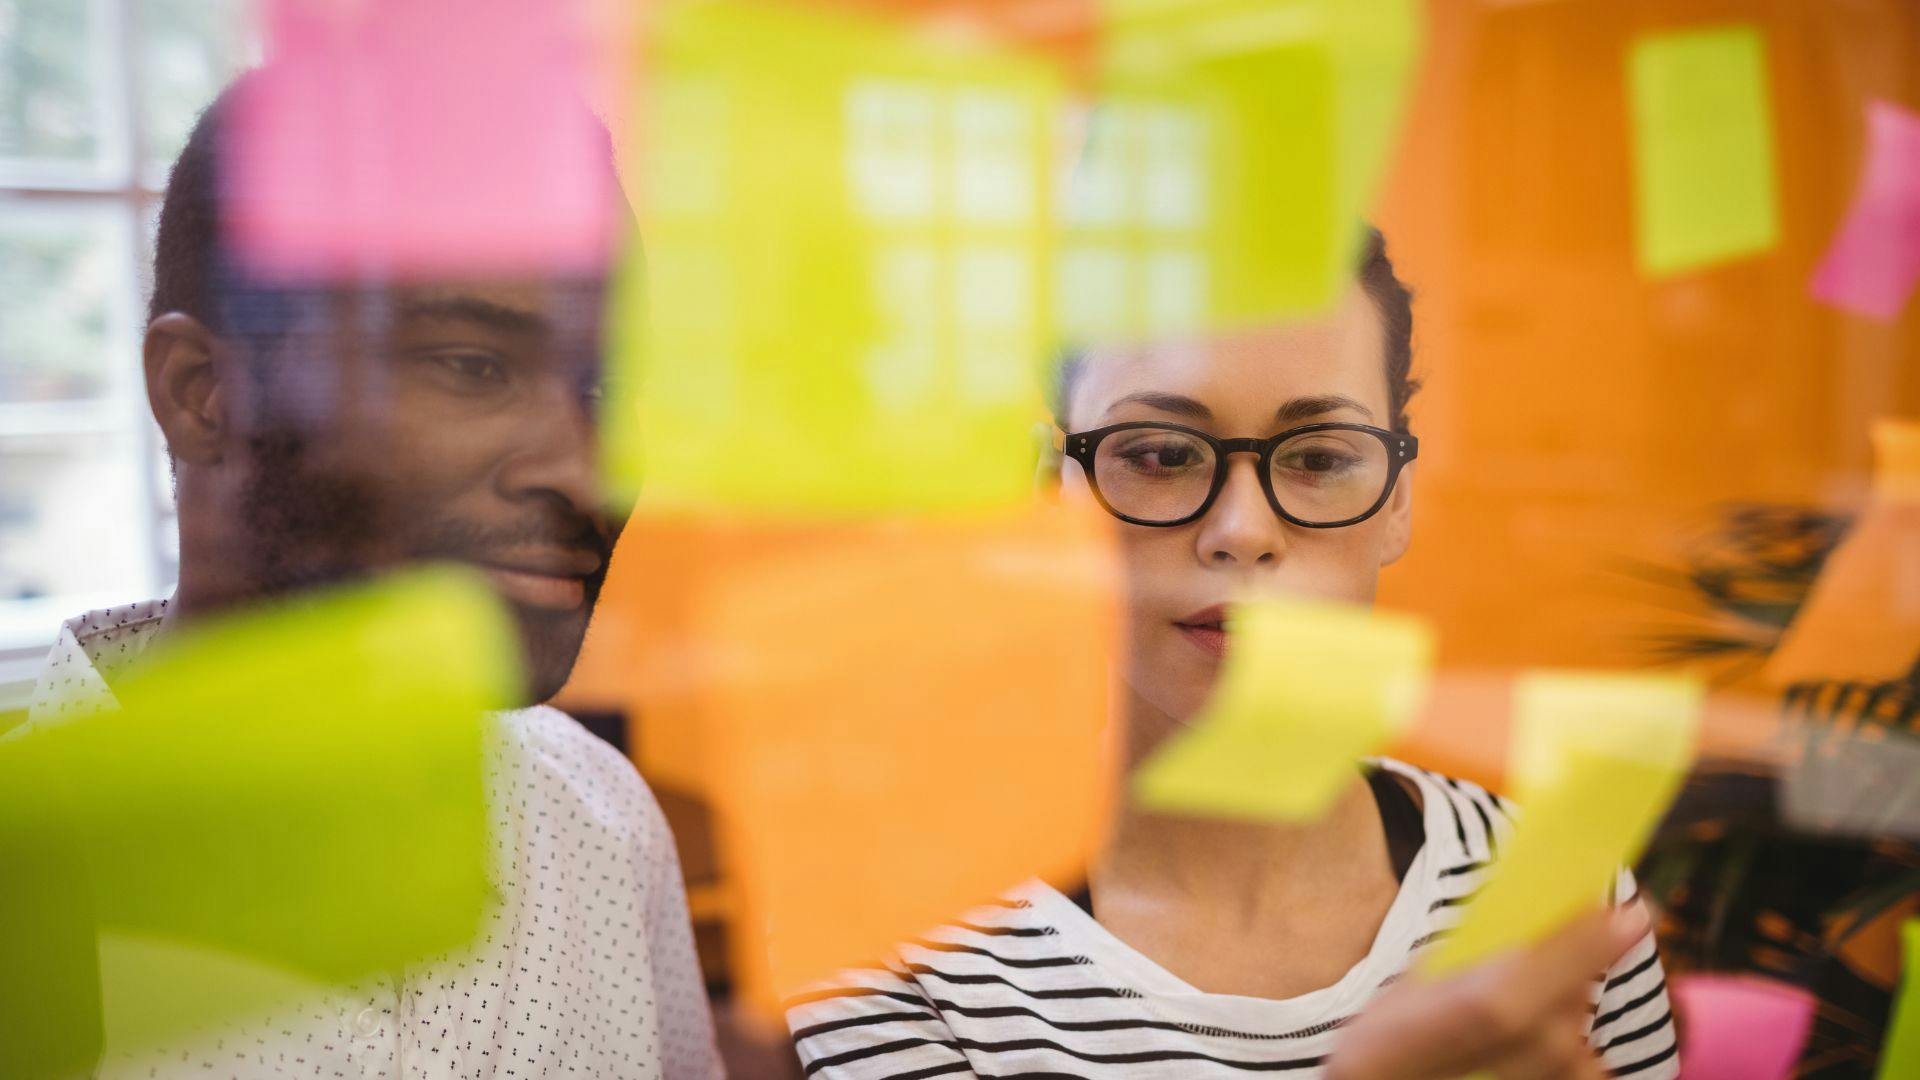 A woman and man in the office looking at various sticky notes